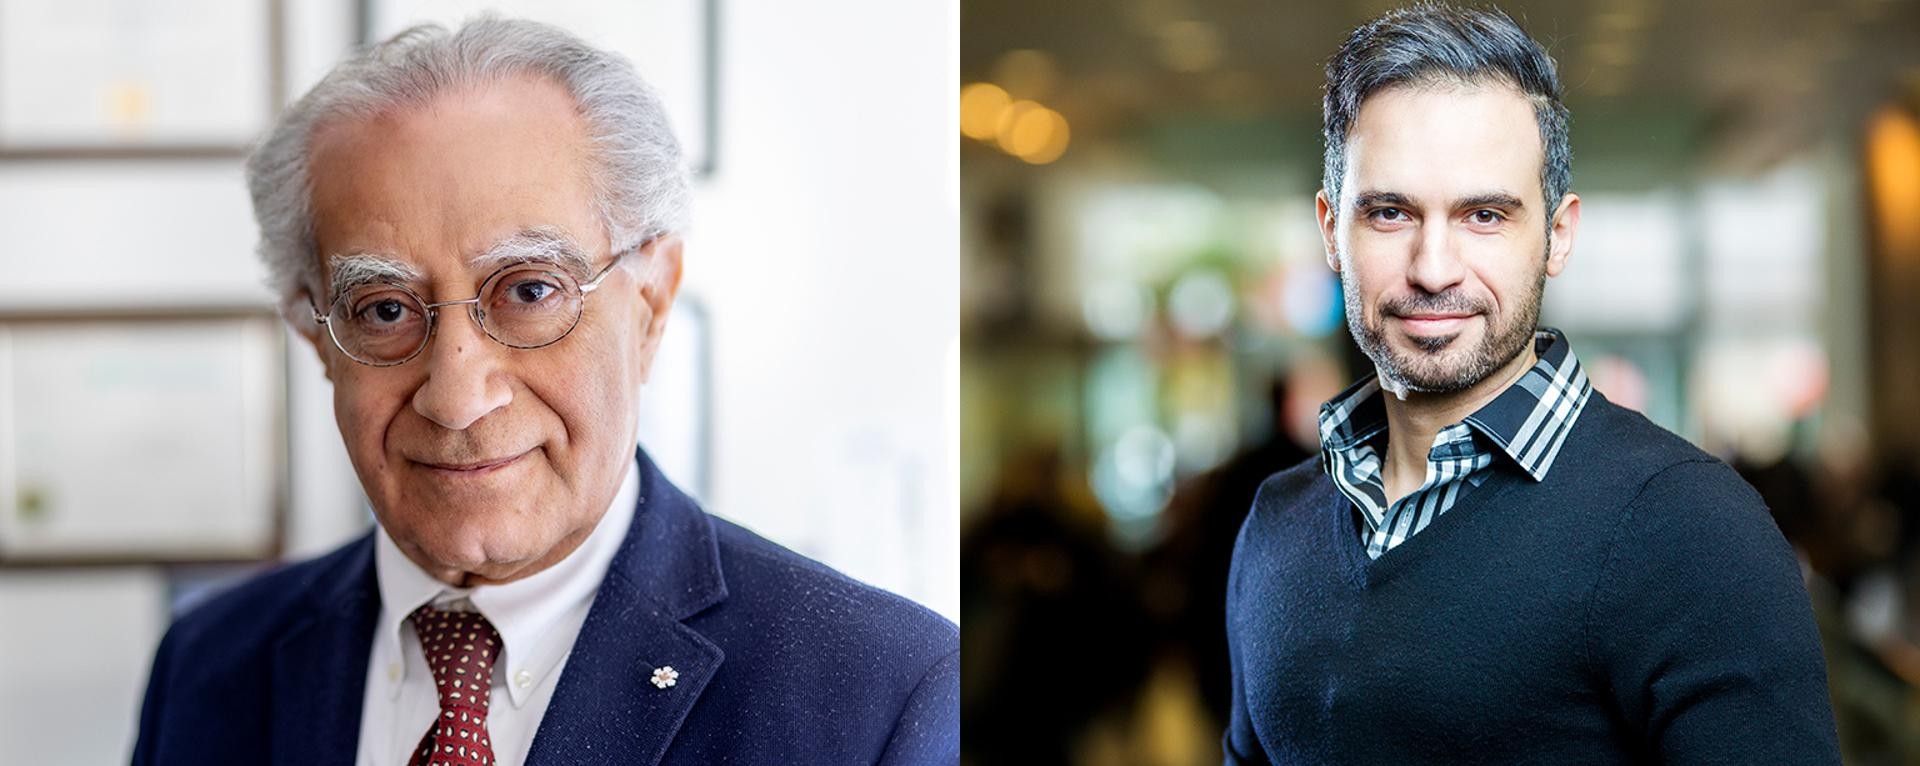 Side-by-side portraits of two individuals. On the left is an older gentleman with white hair and glasses, wearing a dark blue suit and a red tie. On the right is a younger man with short dark hair and a beard, wearing a black sweater over a plaid shirt. Both are smiling slightly and looking directly at the camera. The background is blurred.